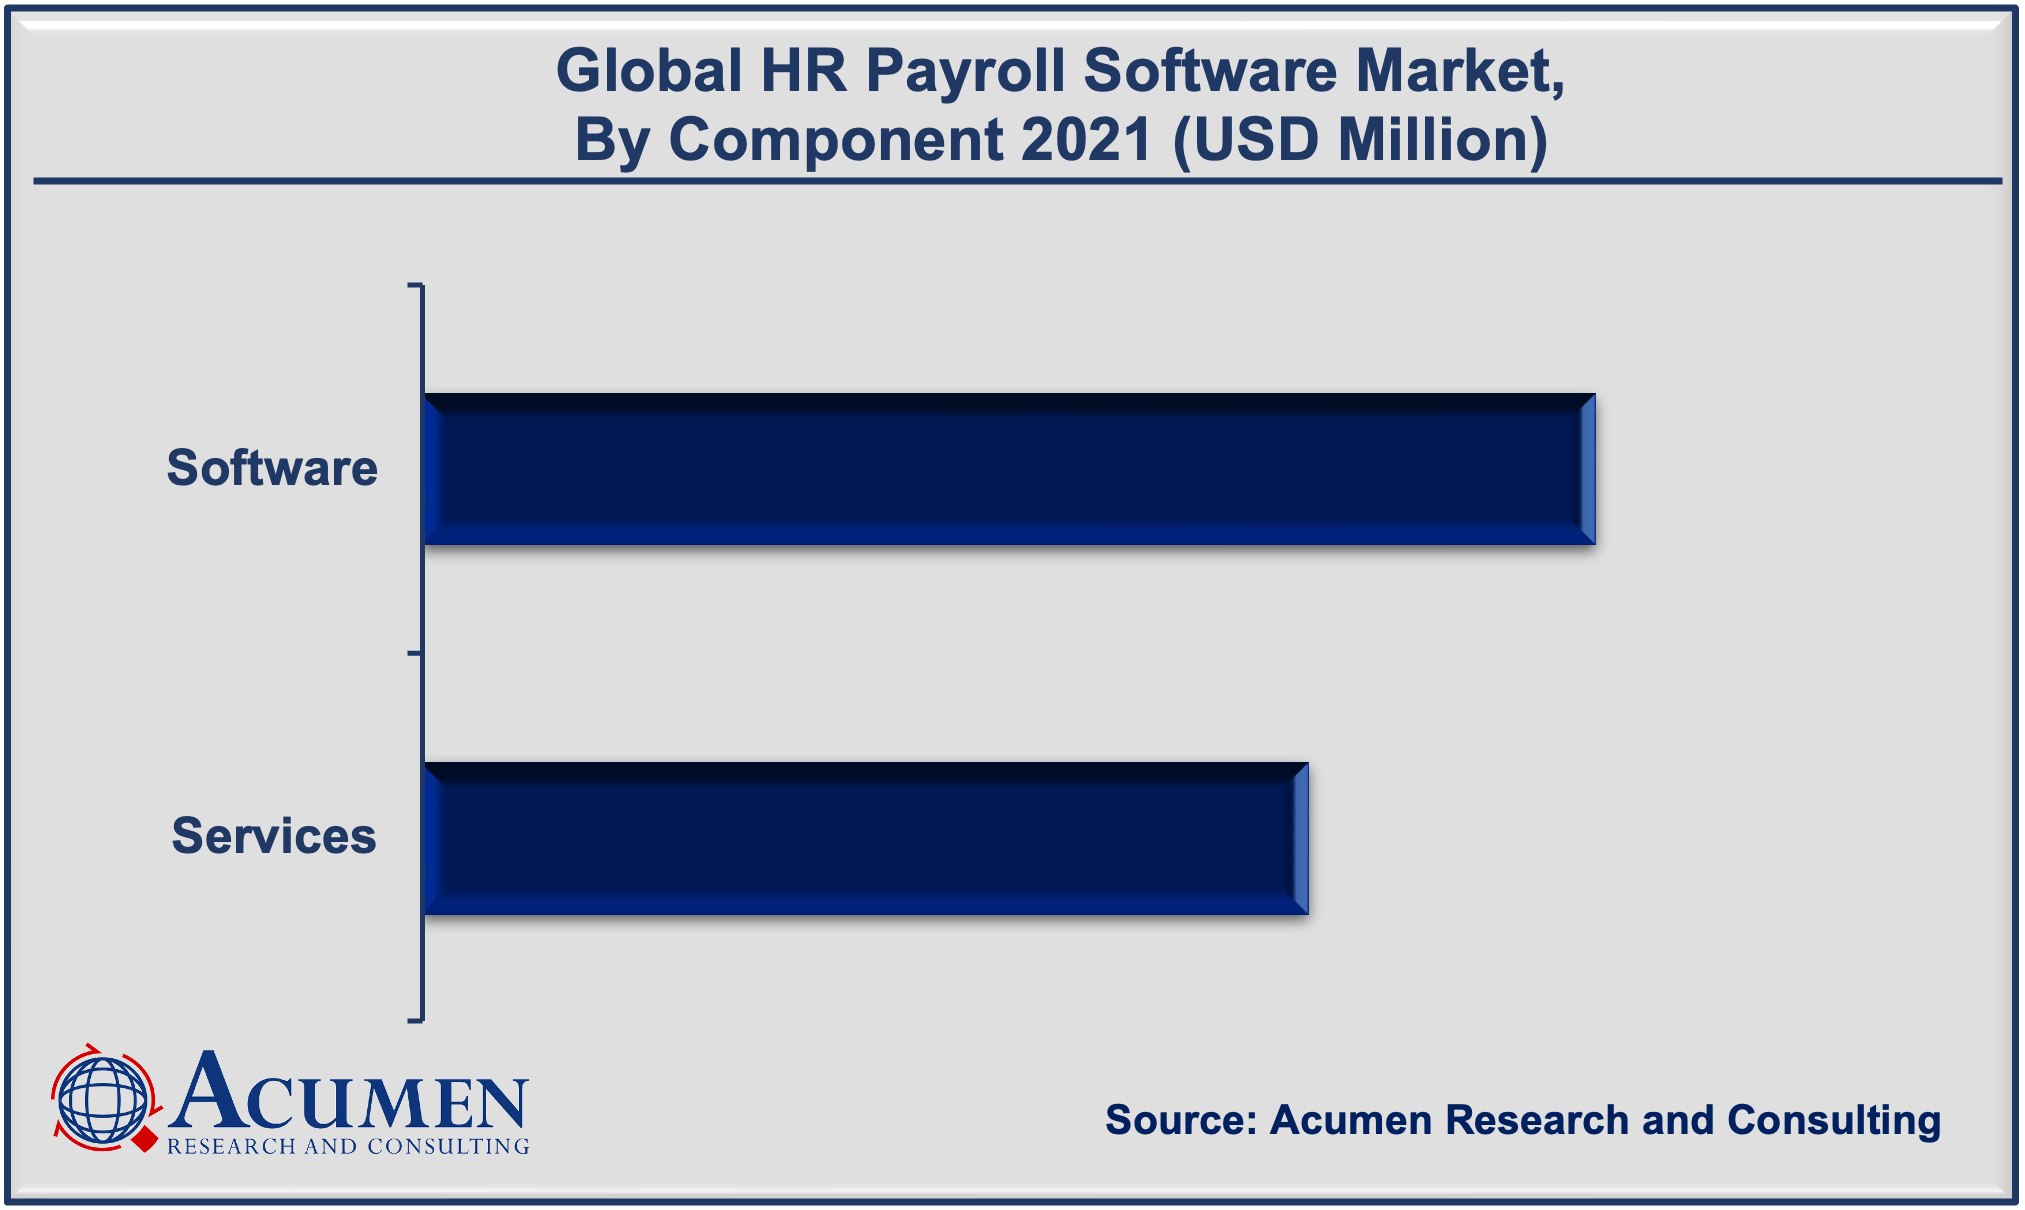 HR Payroll Software Market Size accounted for USD 23,489 Million in 2021 and is projected to reach USD 52,867 Million by 2030, with a CAGR of 9.5% from 2022 to 2030.